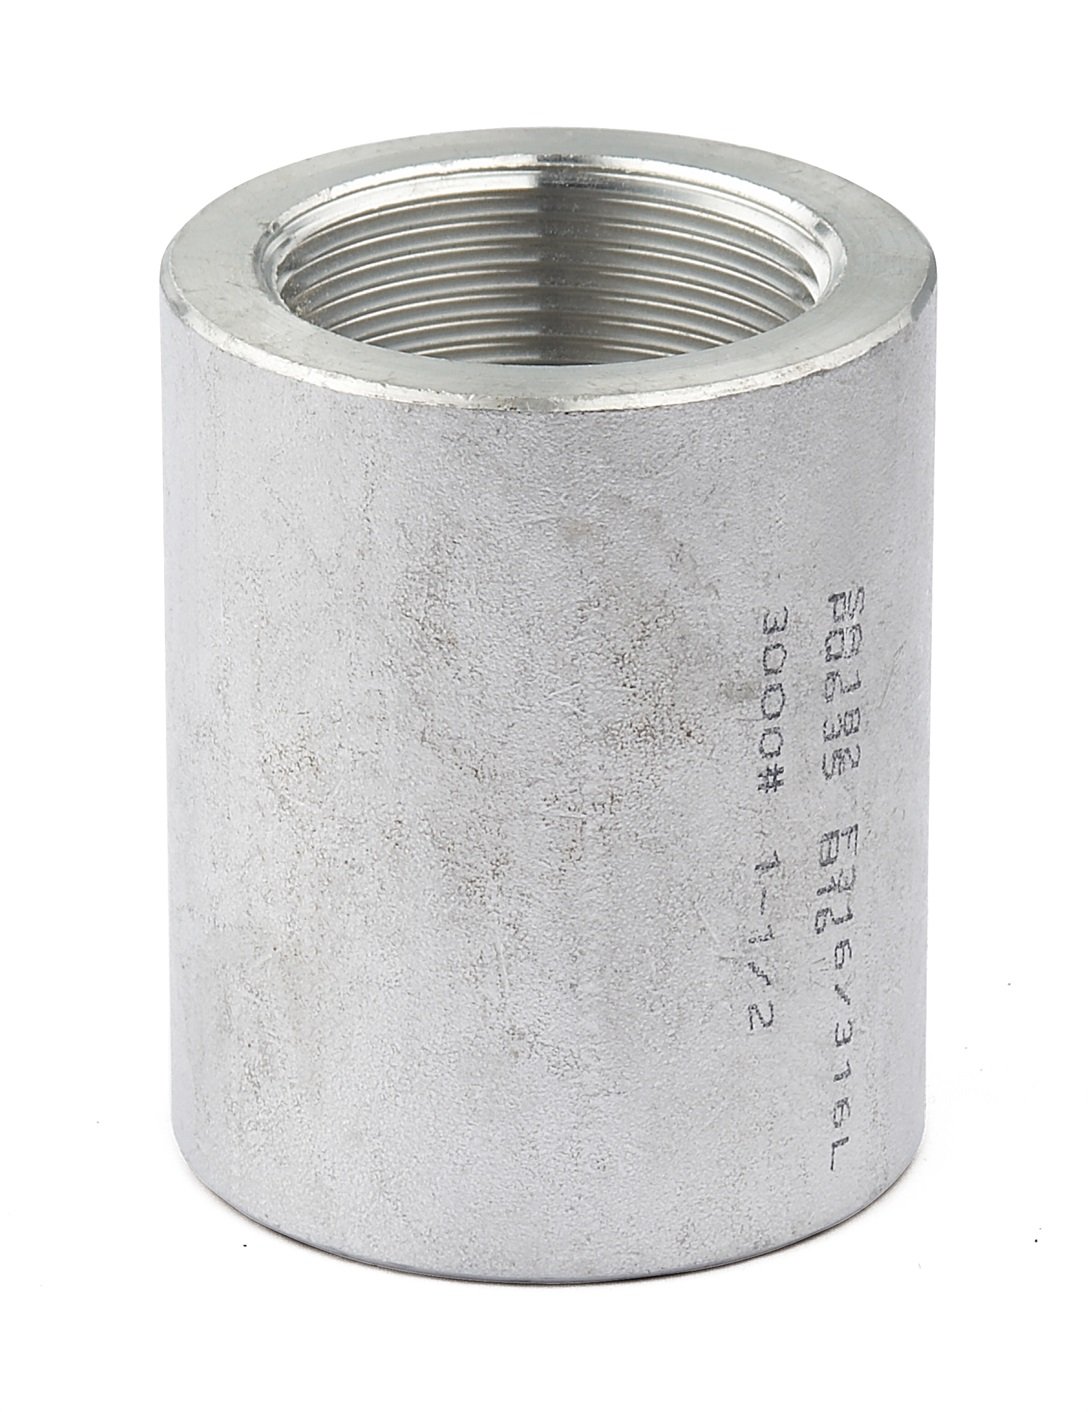 Stainless Steel Female Coupling